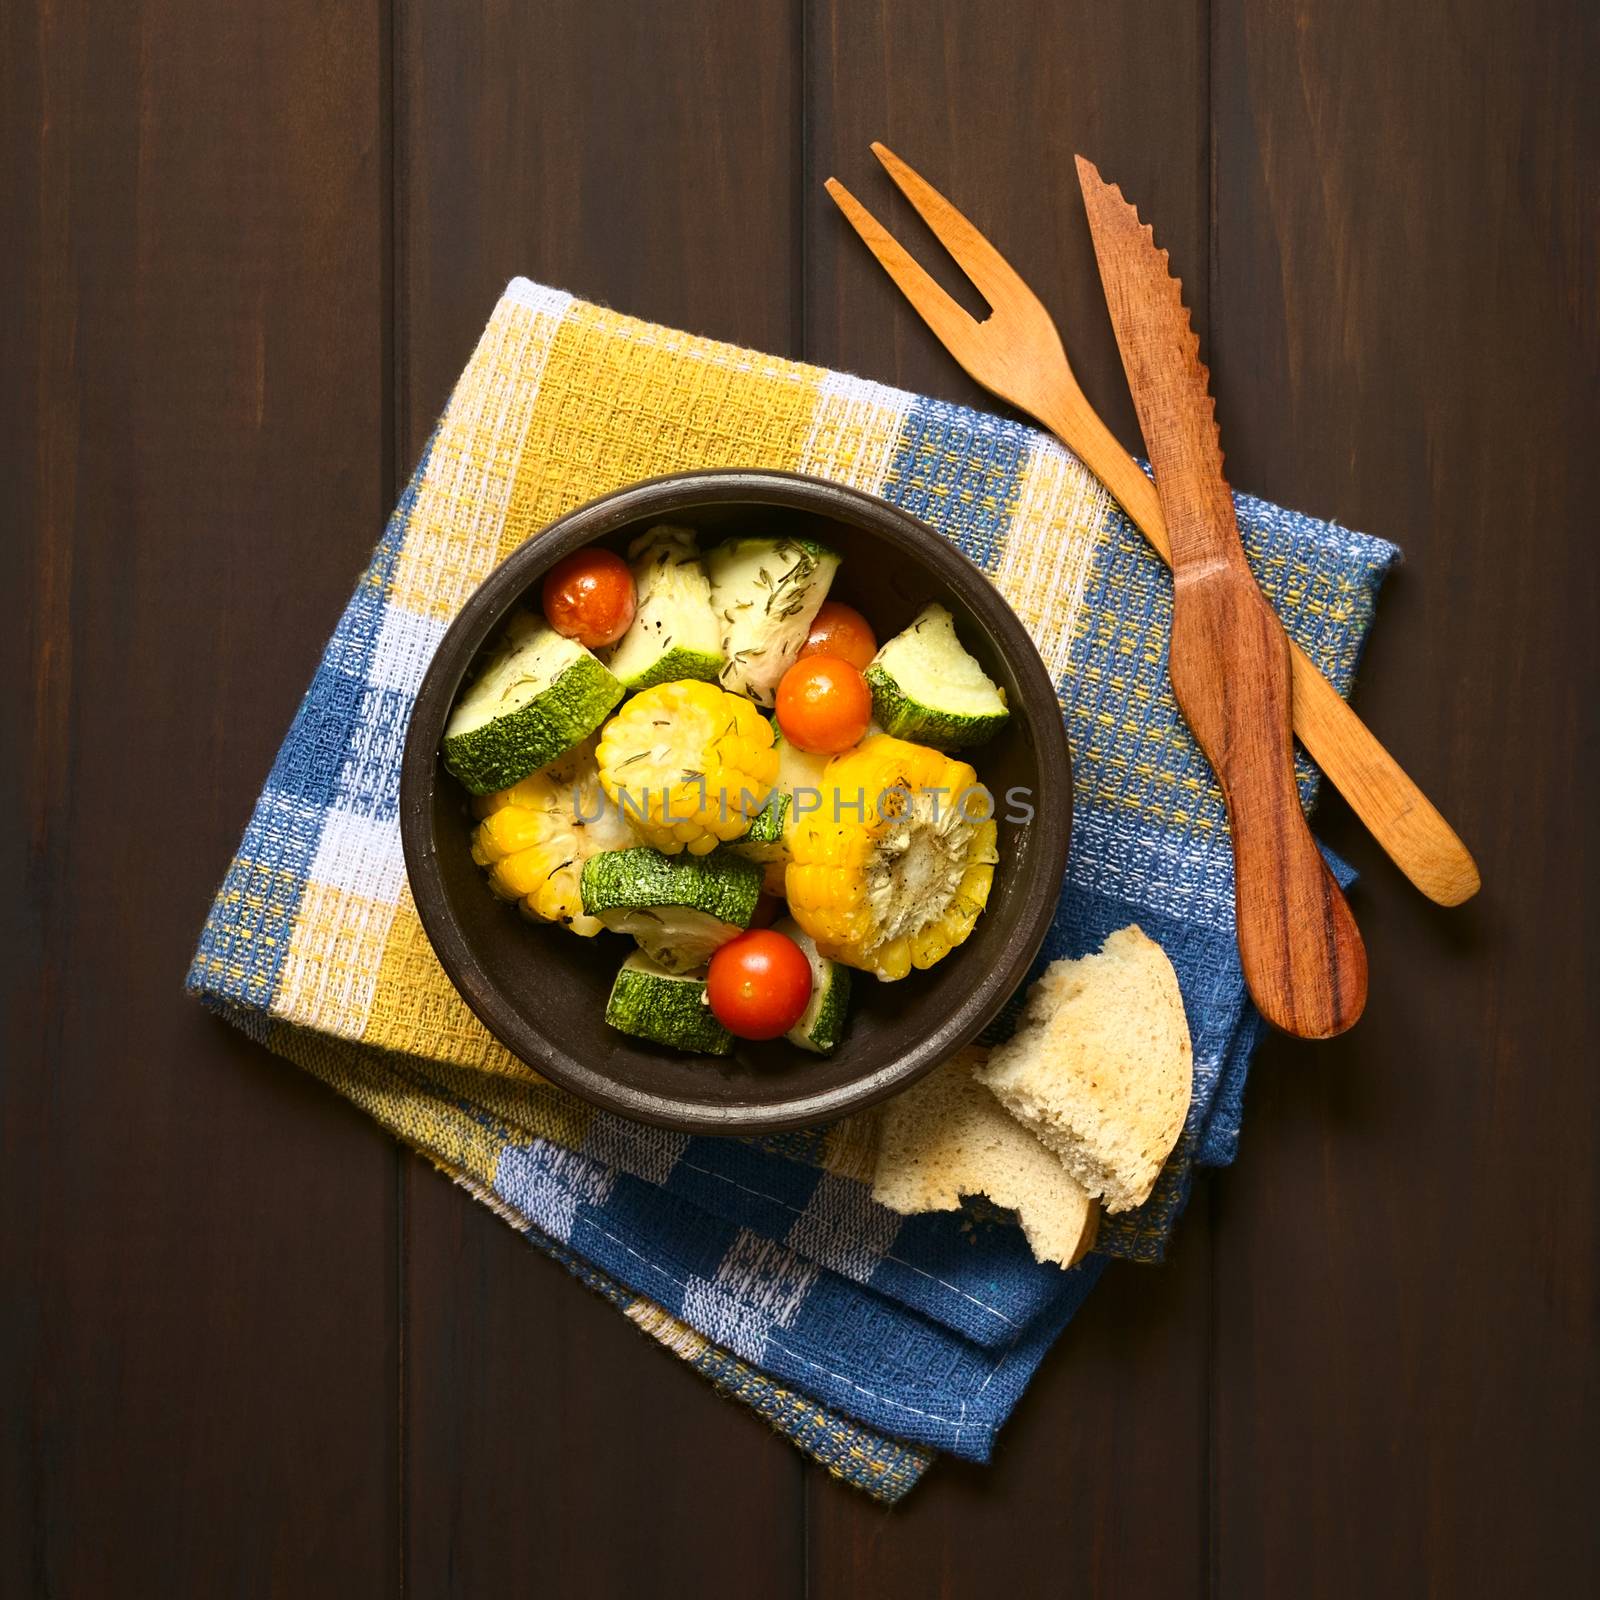 Overhead shot of a bowl of baked vegetables of sweet corn, zucchini, cherry tomato with thyme, toasted bread slice and wooden cutlery on the side, photographed on dark wood with natural light